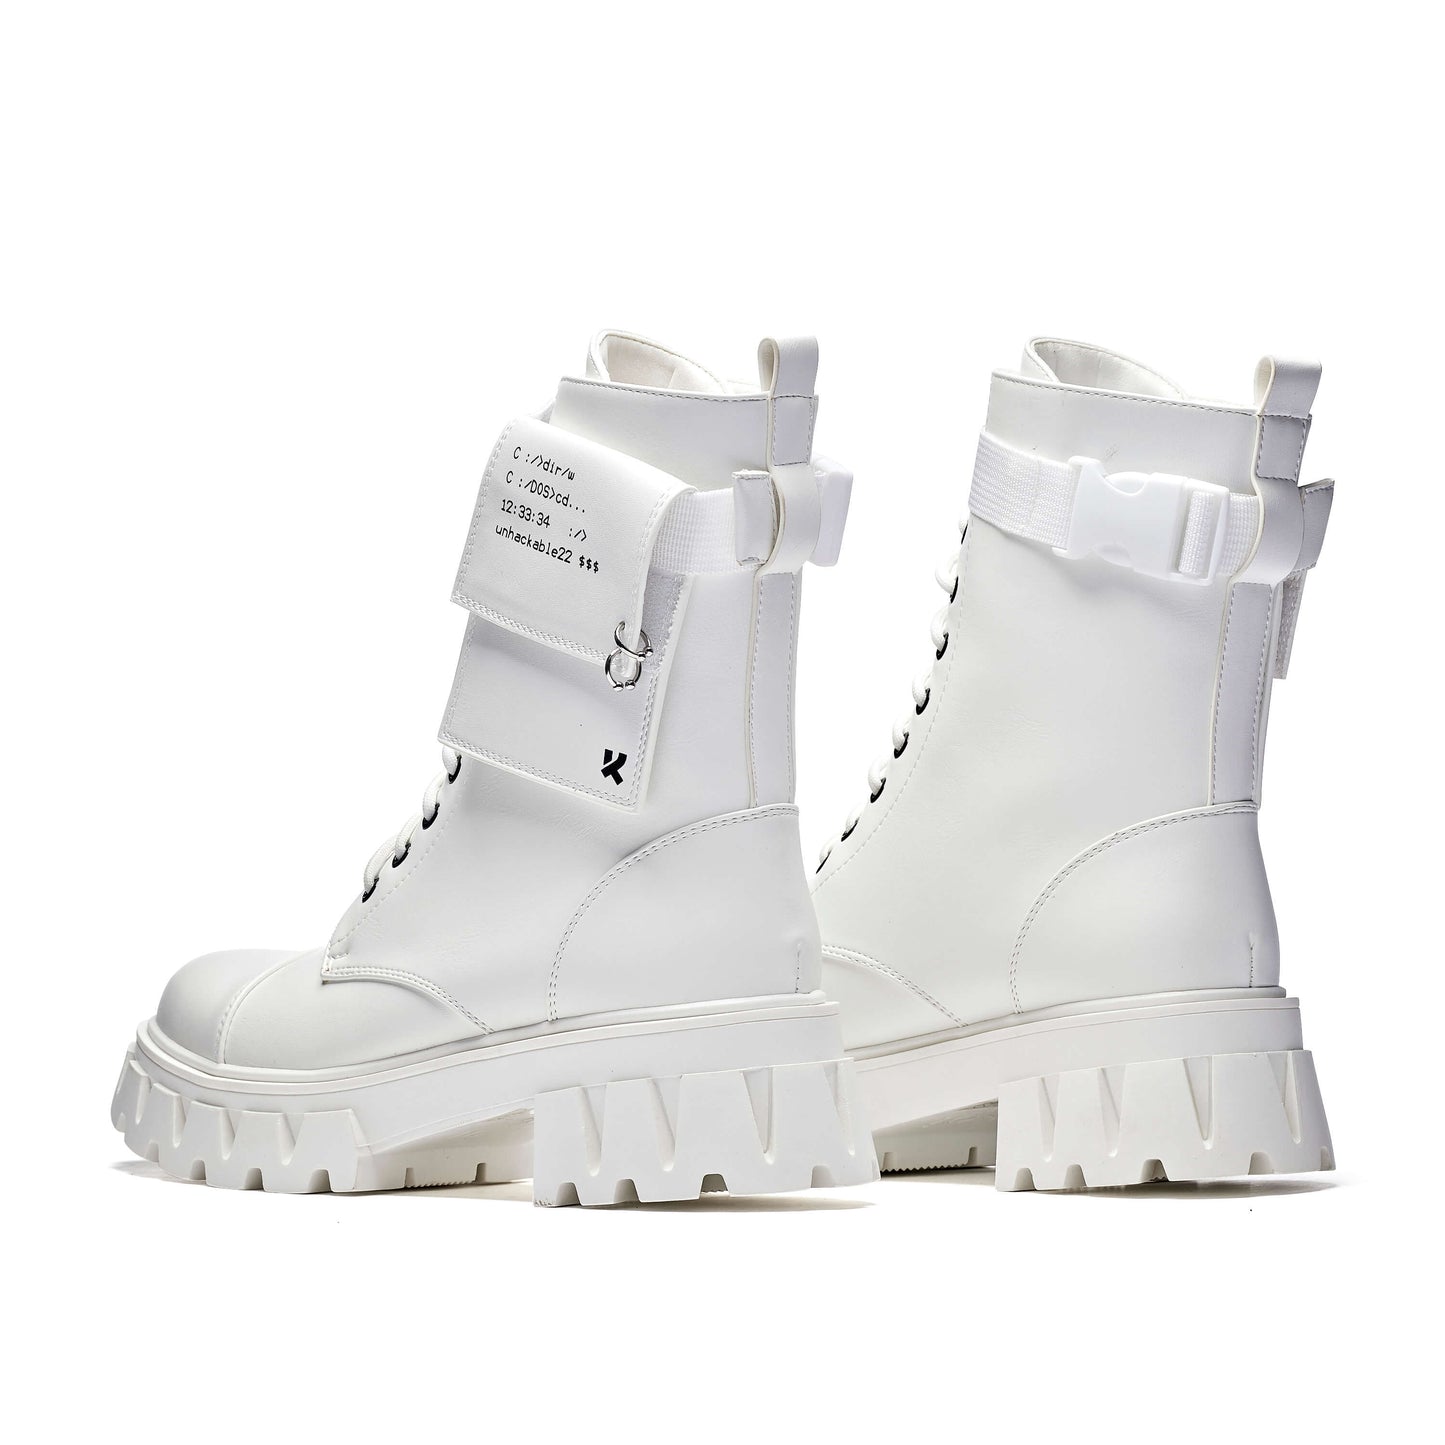 Banshee White Boots - Ankle Boots - KOI Footwear - White - Back View